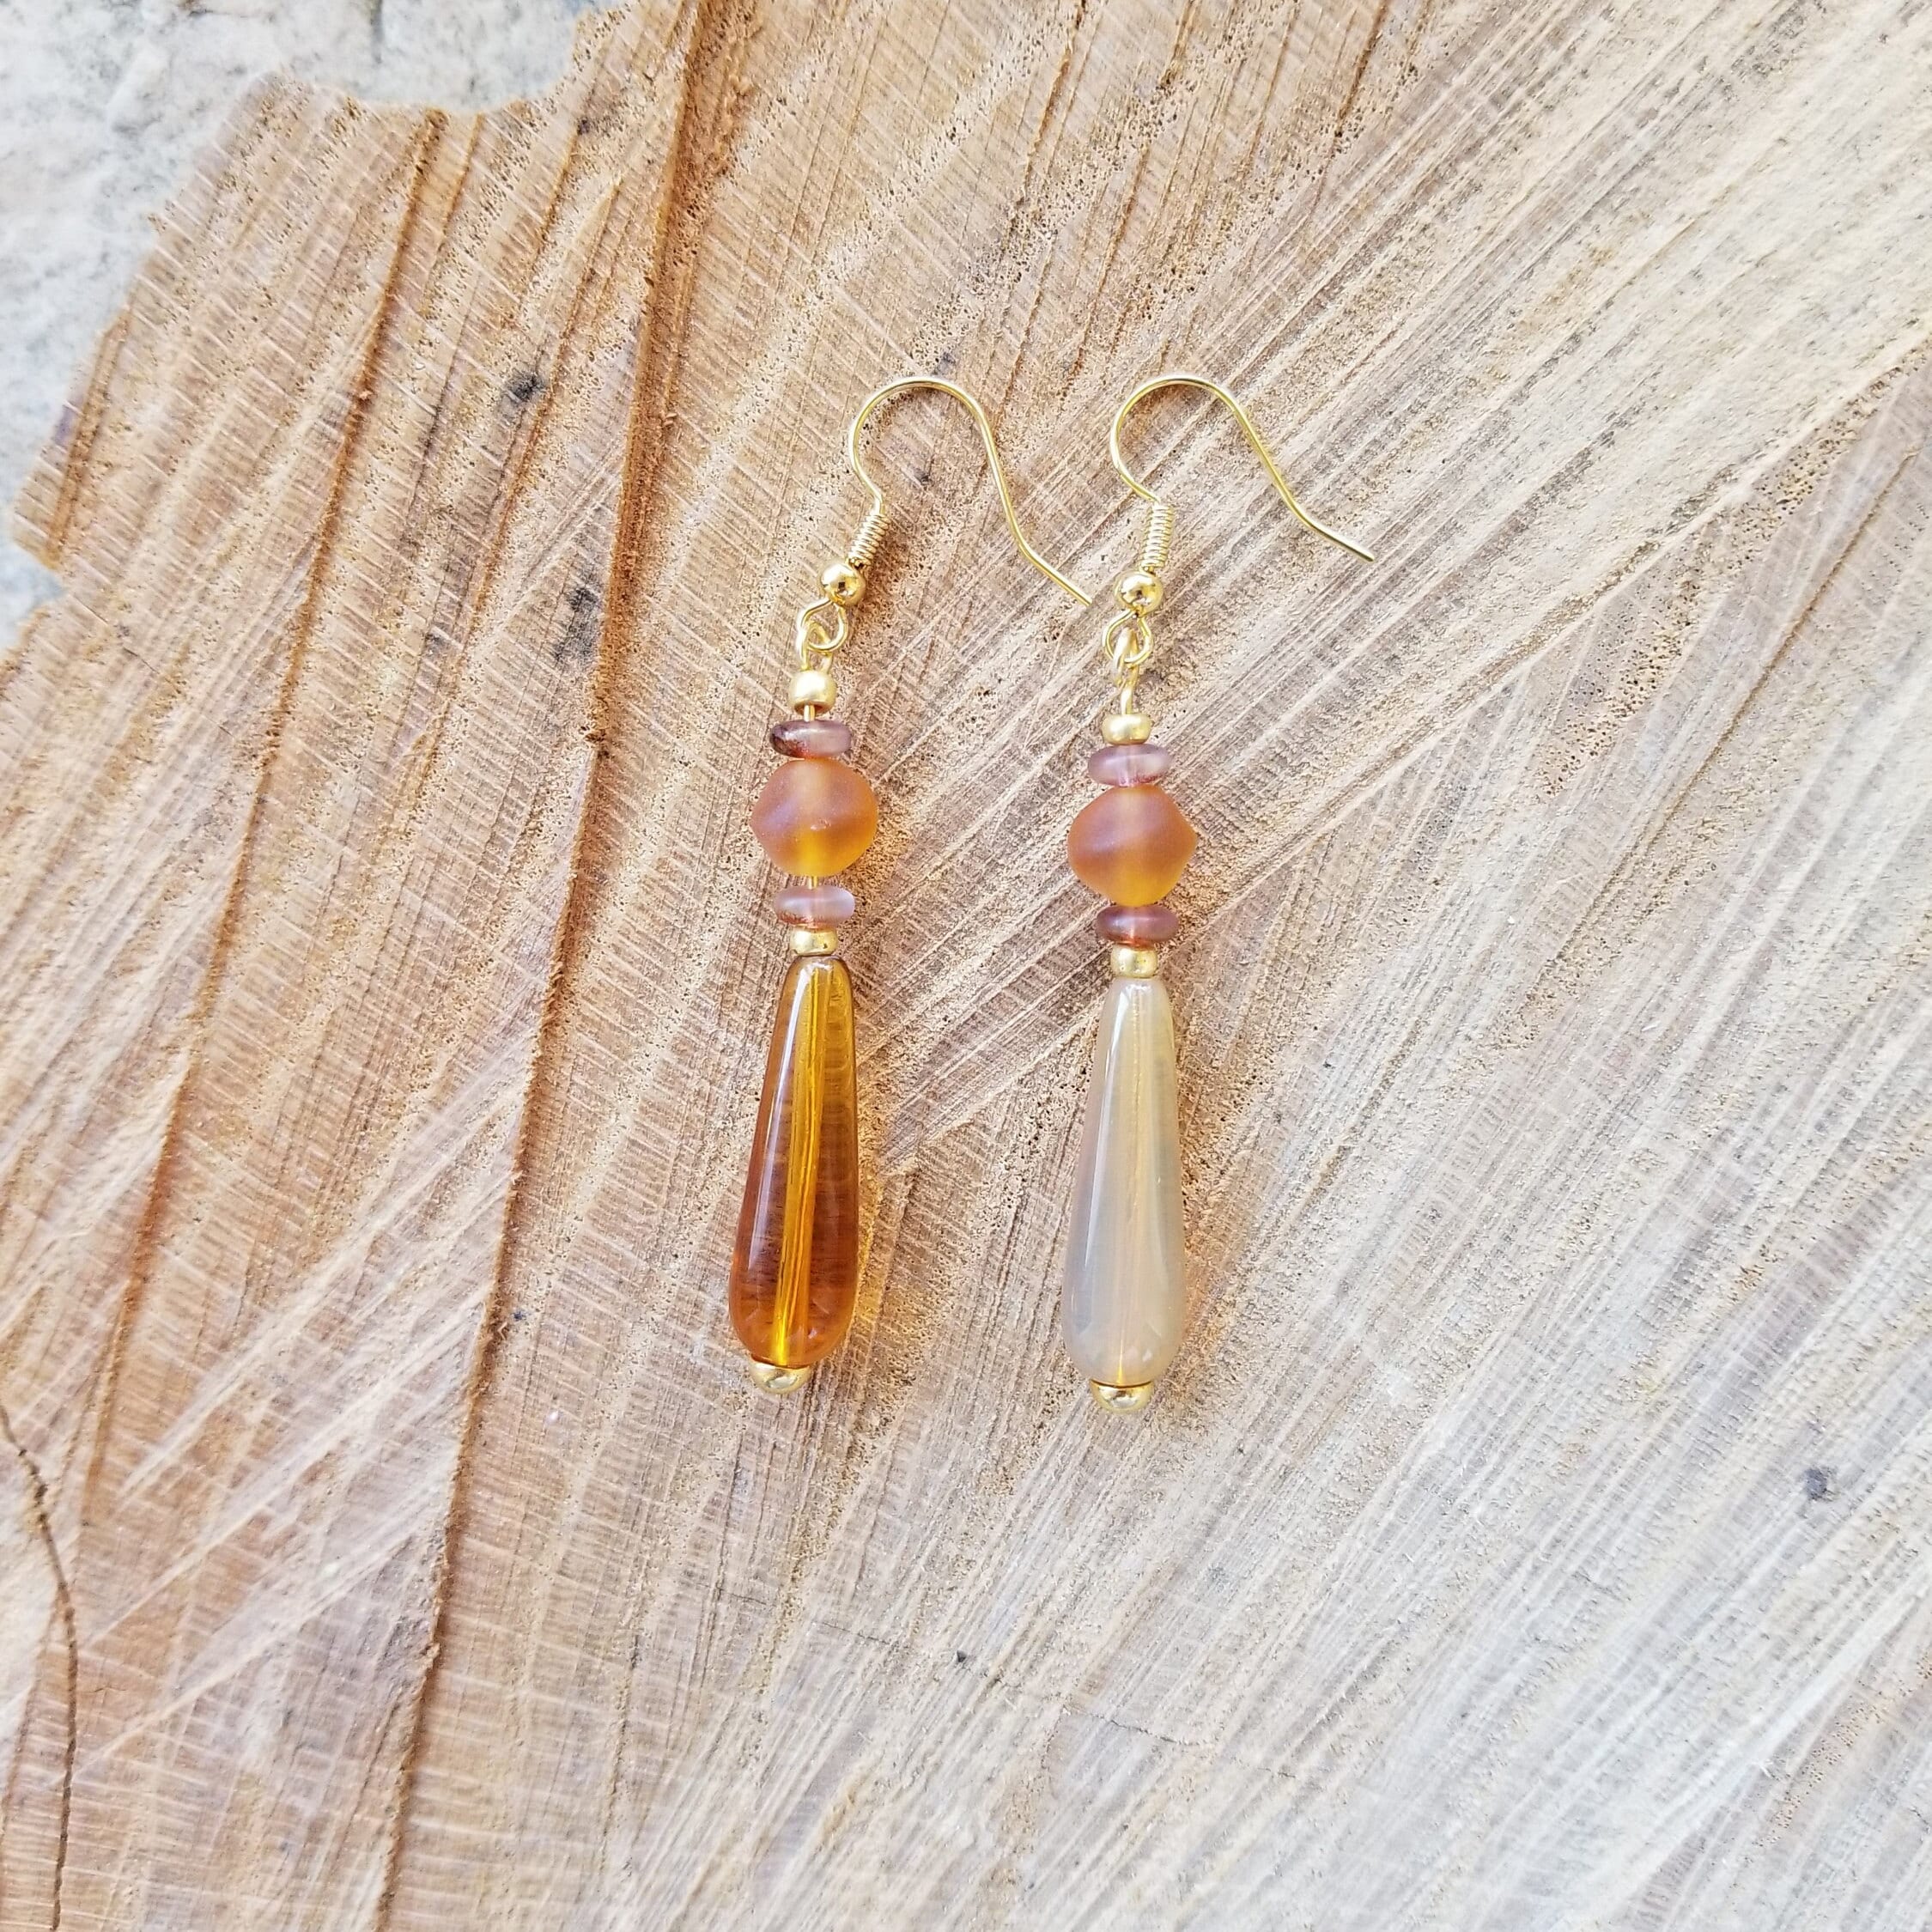 Earrings Hessonite and Czech Glass Gold Filled Star Earrings With Genuine Amber